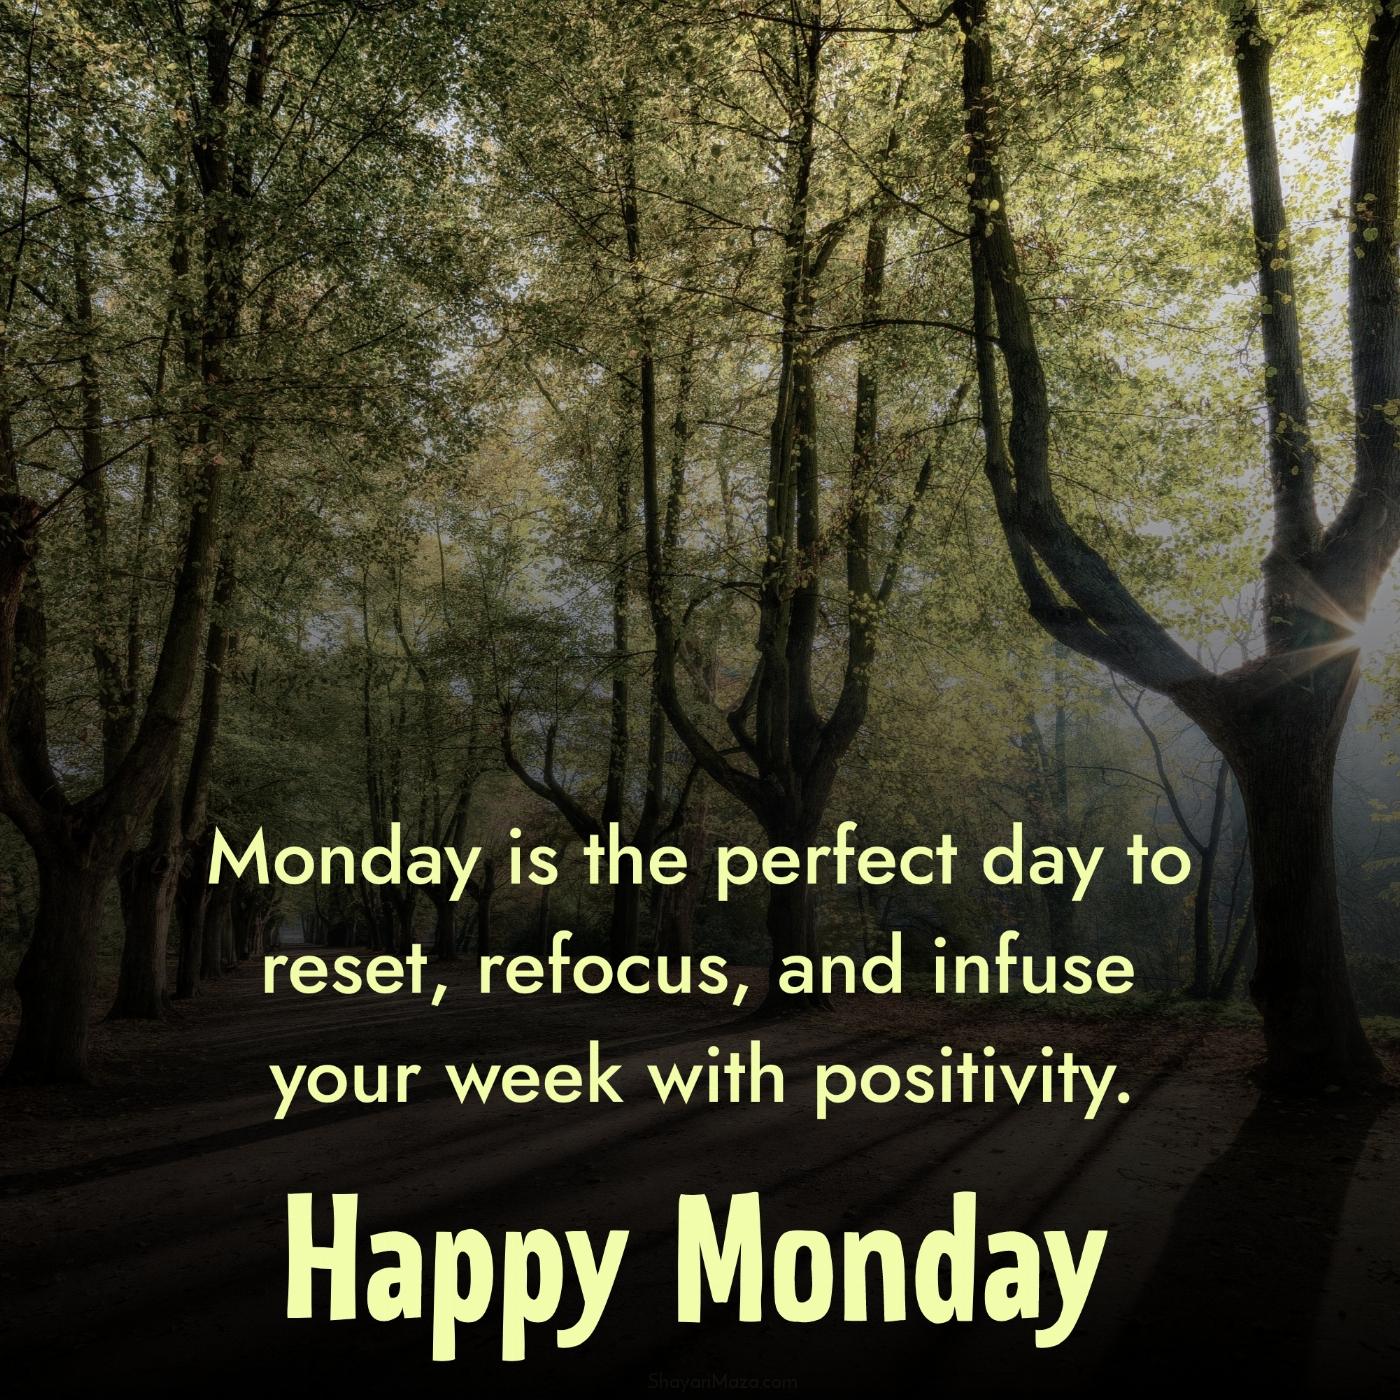 Monday is the perfect day to reset refocus and infuse